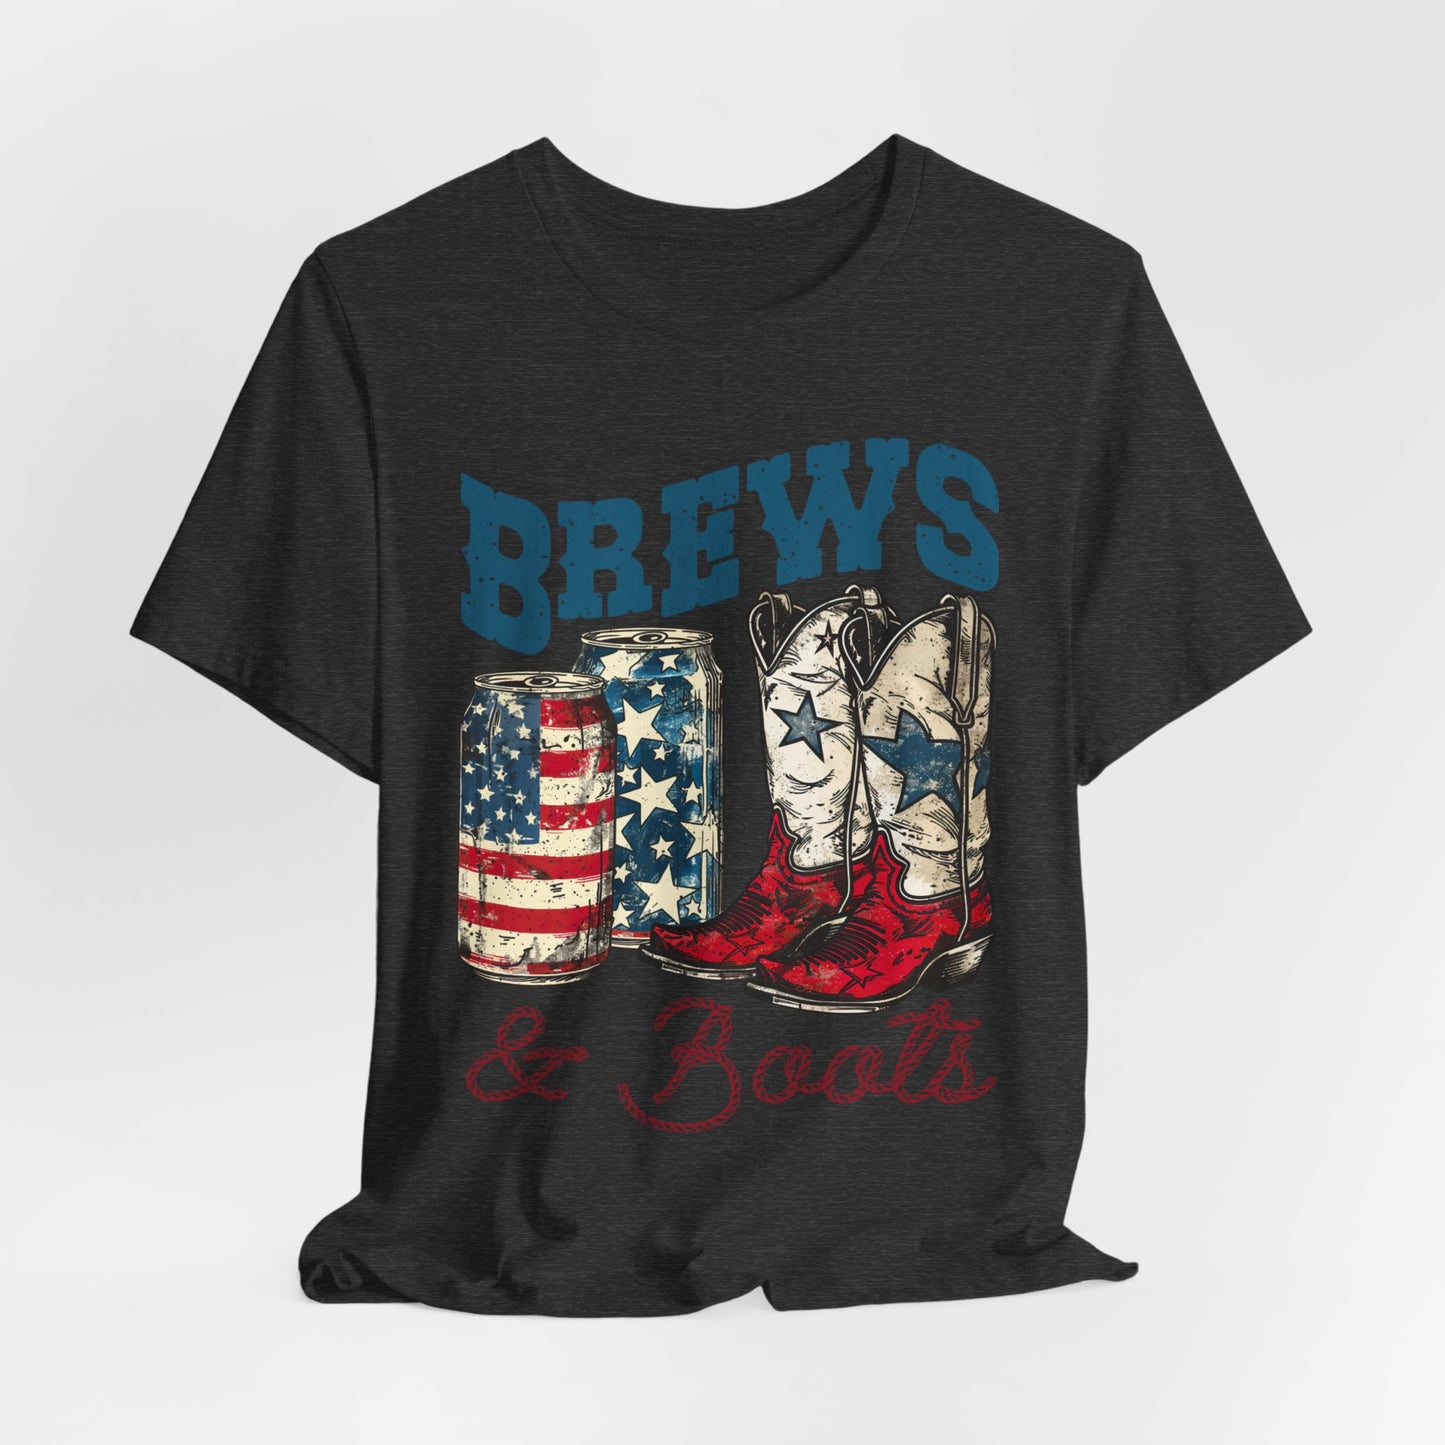 Brews and Boats Western USA Women's Short Sleeve Tee